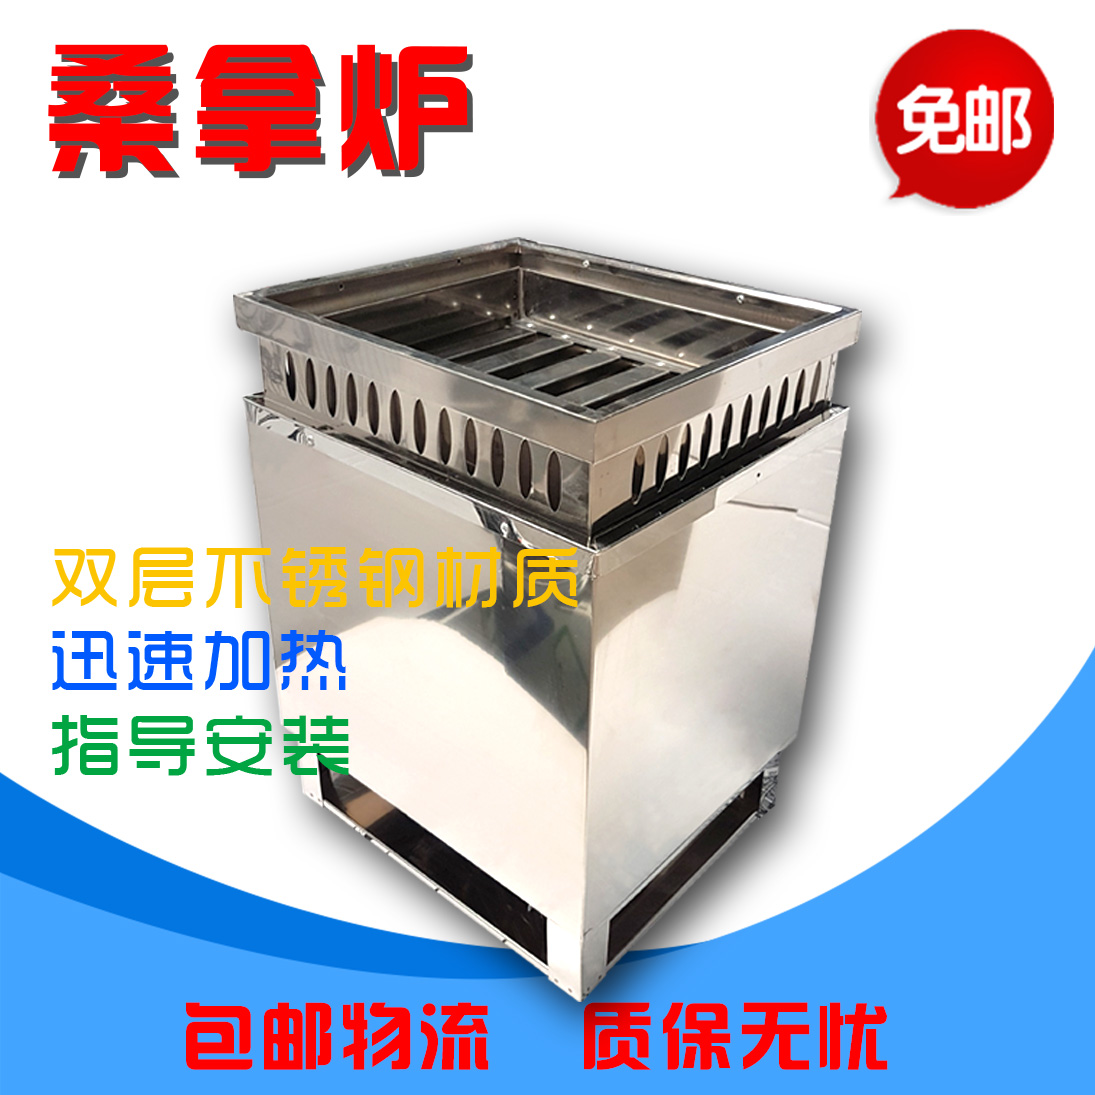 Sauna furnace Stainless steel dry steam steam furnace Commercial sauna room electric stove Sauna room equipment Stone sauna furnace